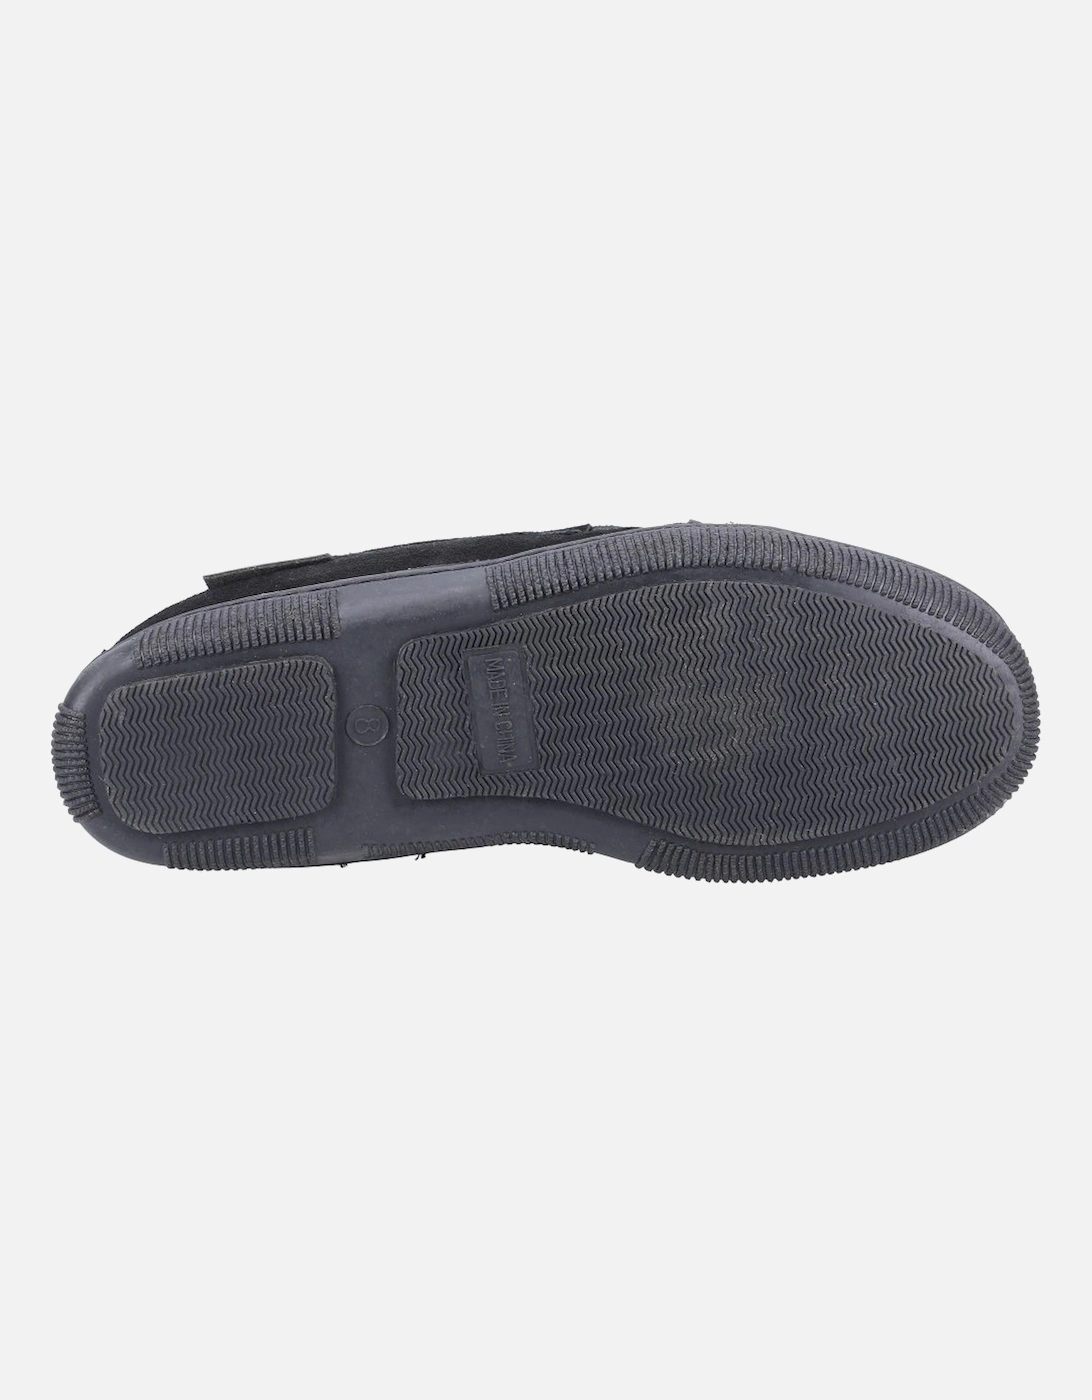 Ace Mens Slippers